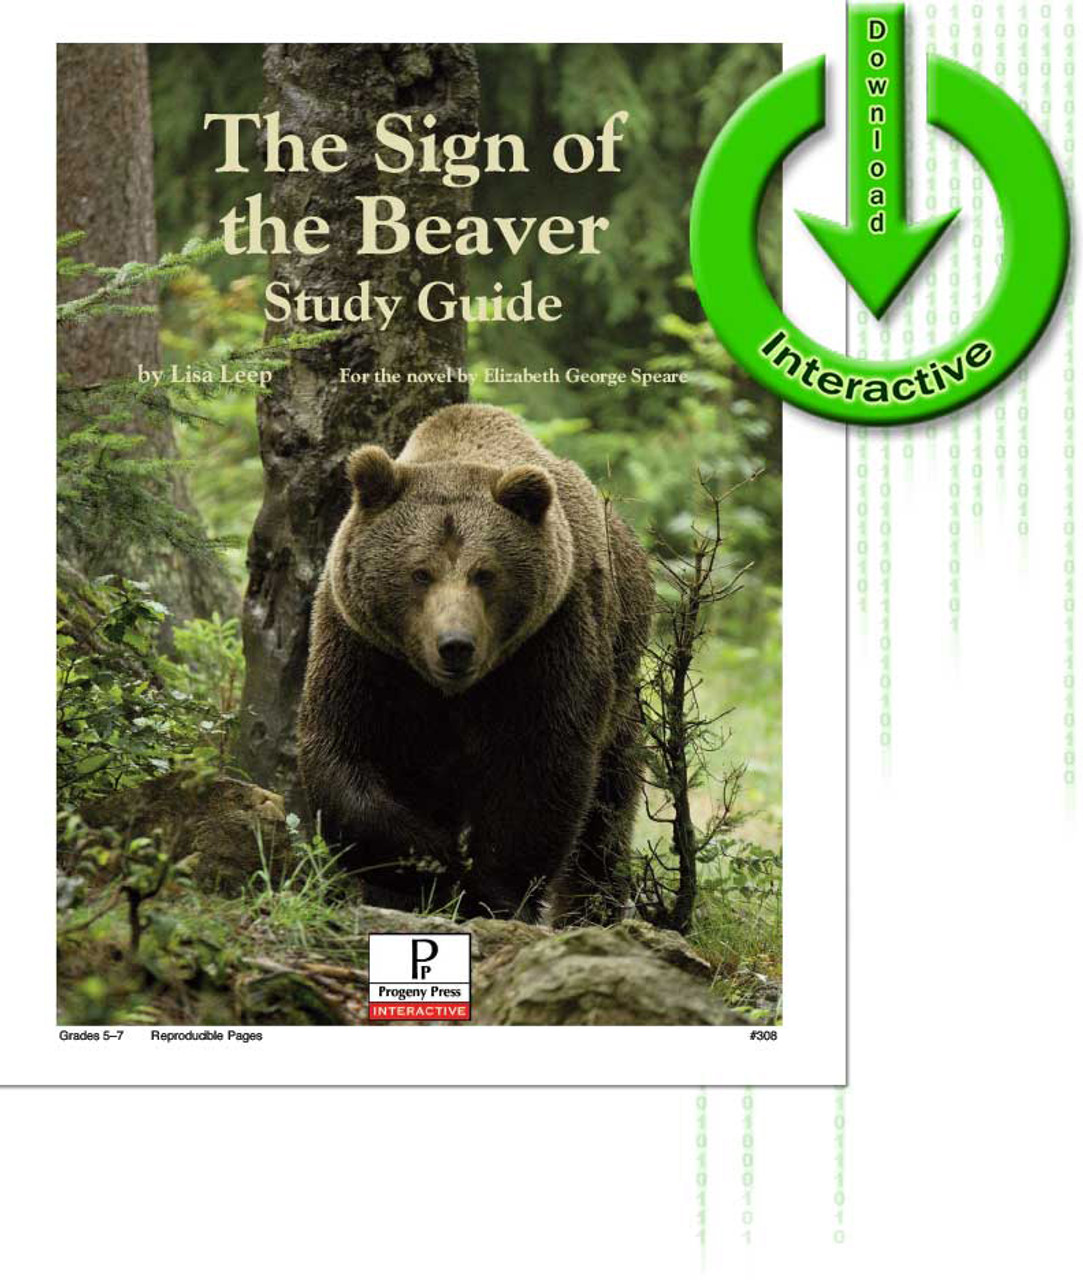 PDF　Progeny　Literature　of　Study　Download　Curriculum　the　Beaver　The　Press　Sign　Guide